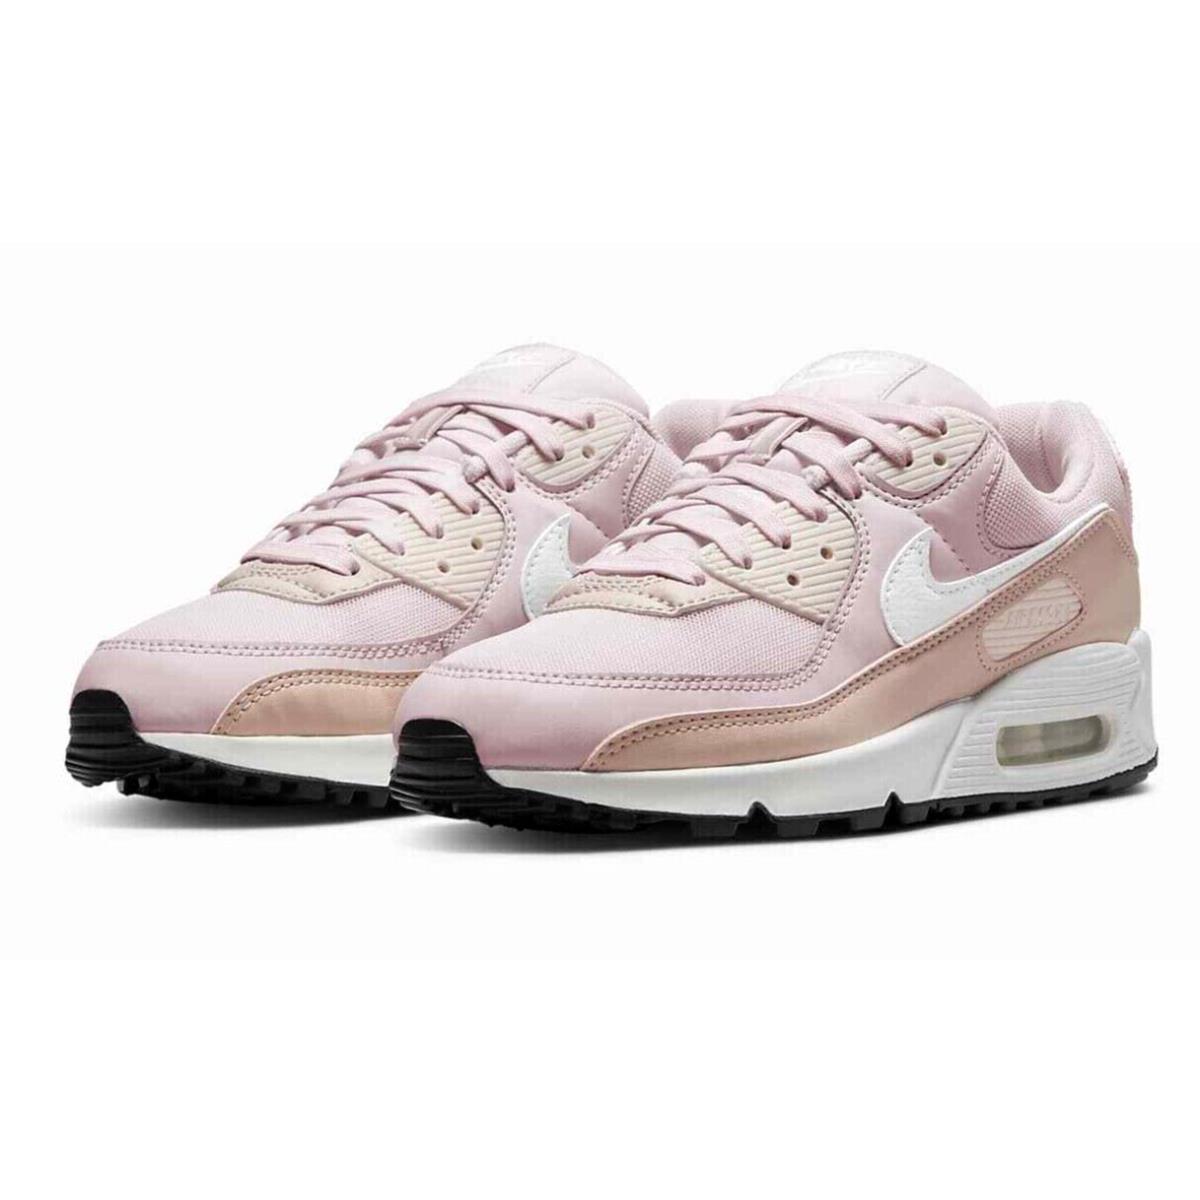 Nike Air Max 90 Womens Size 11 Shoes DH8010 600 Pink Oxford Bearly Rose Black